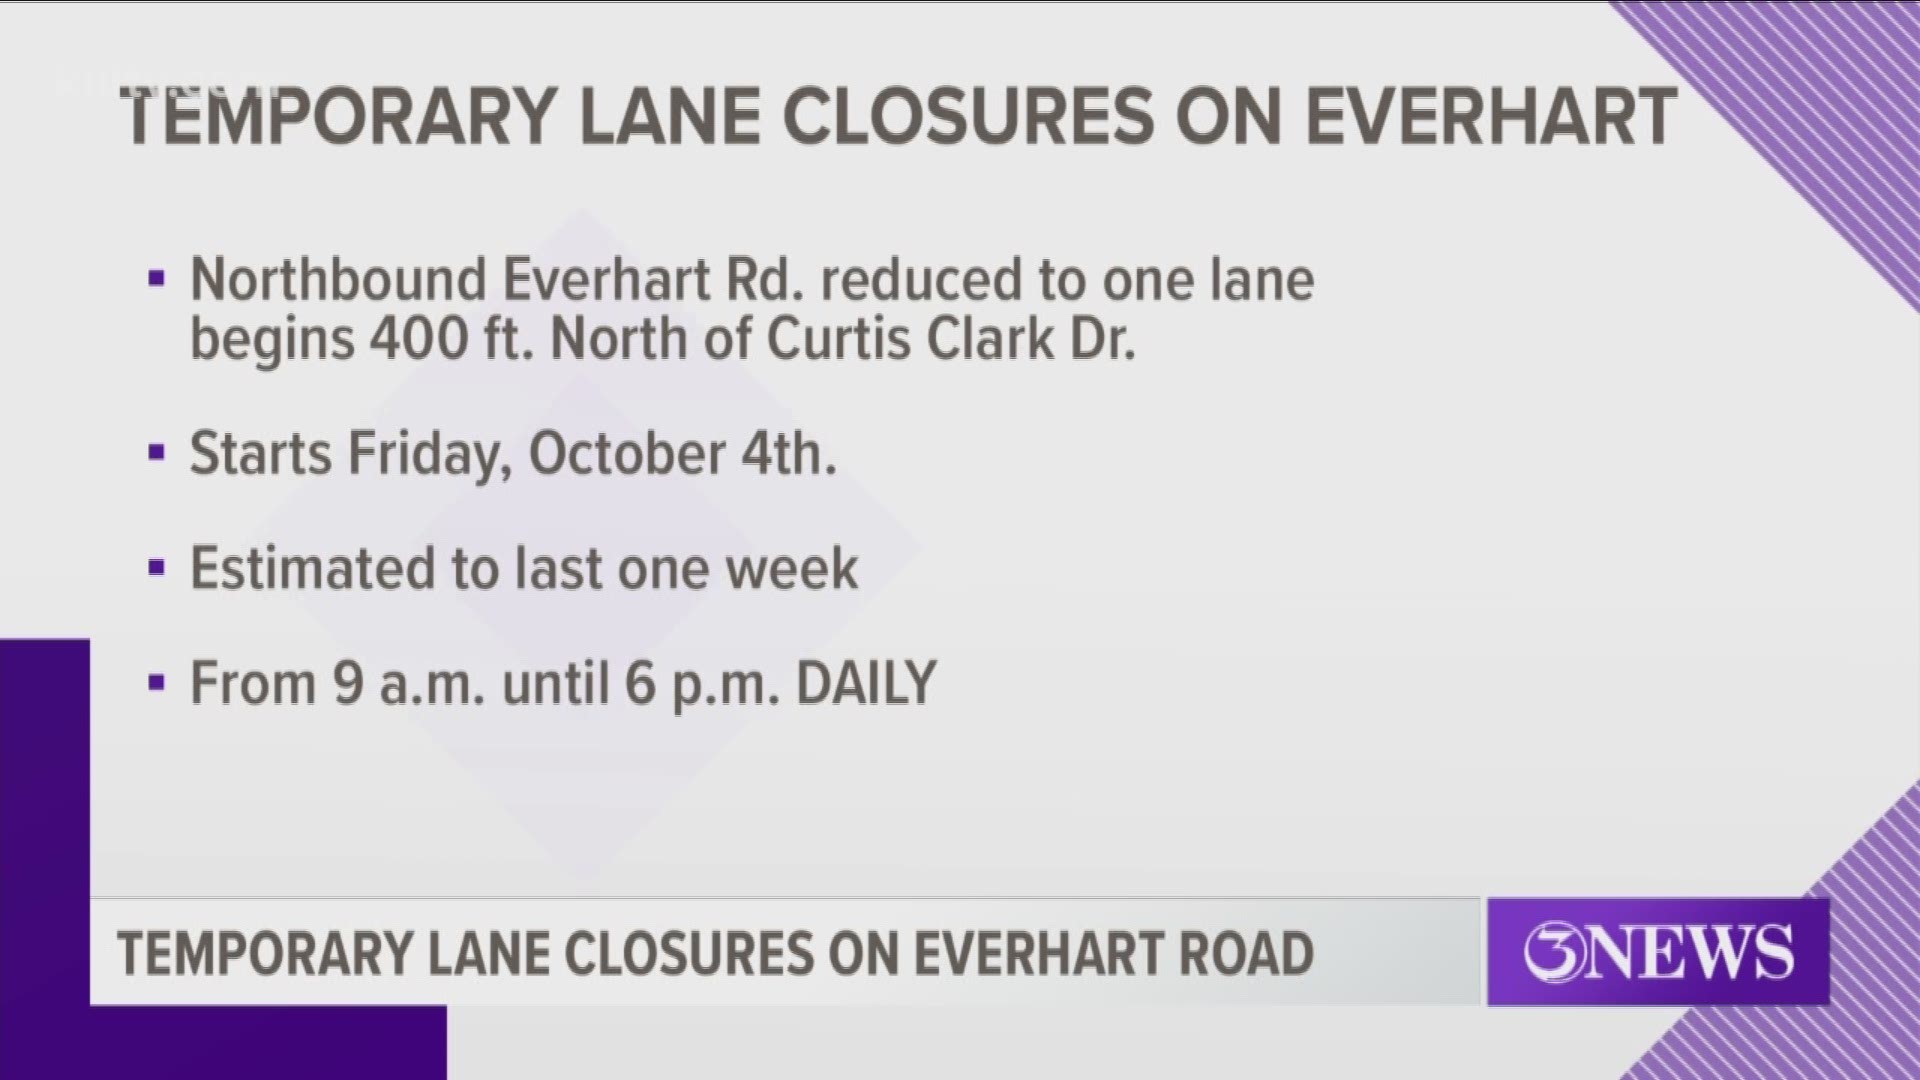 Starting Friday, Oct. 4, northbound Everhart Road will be reduced to a single lane between Curtis Clark Drive and SPID during the day.